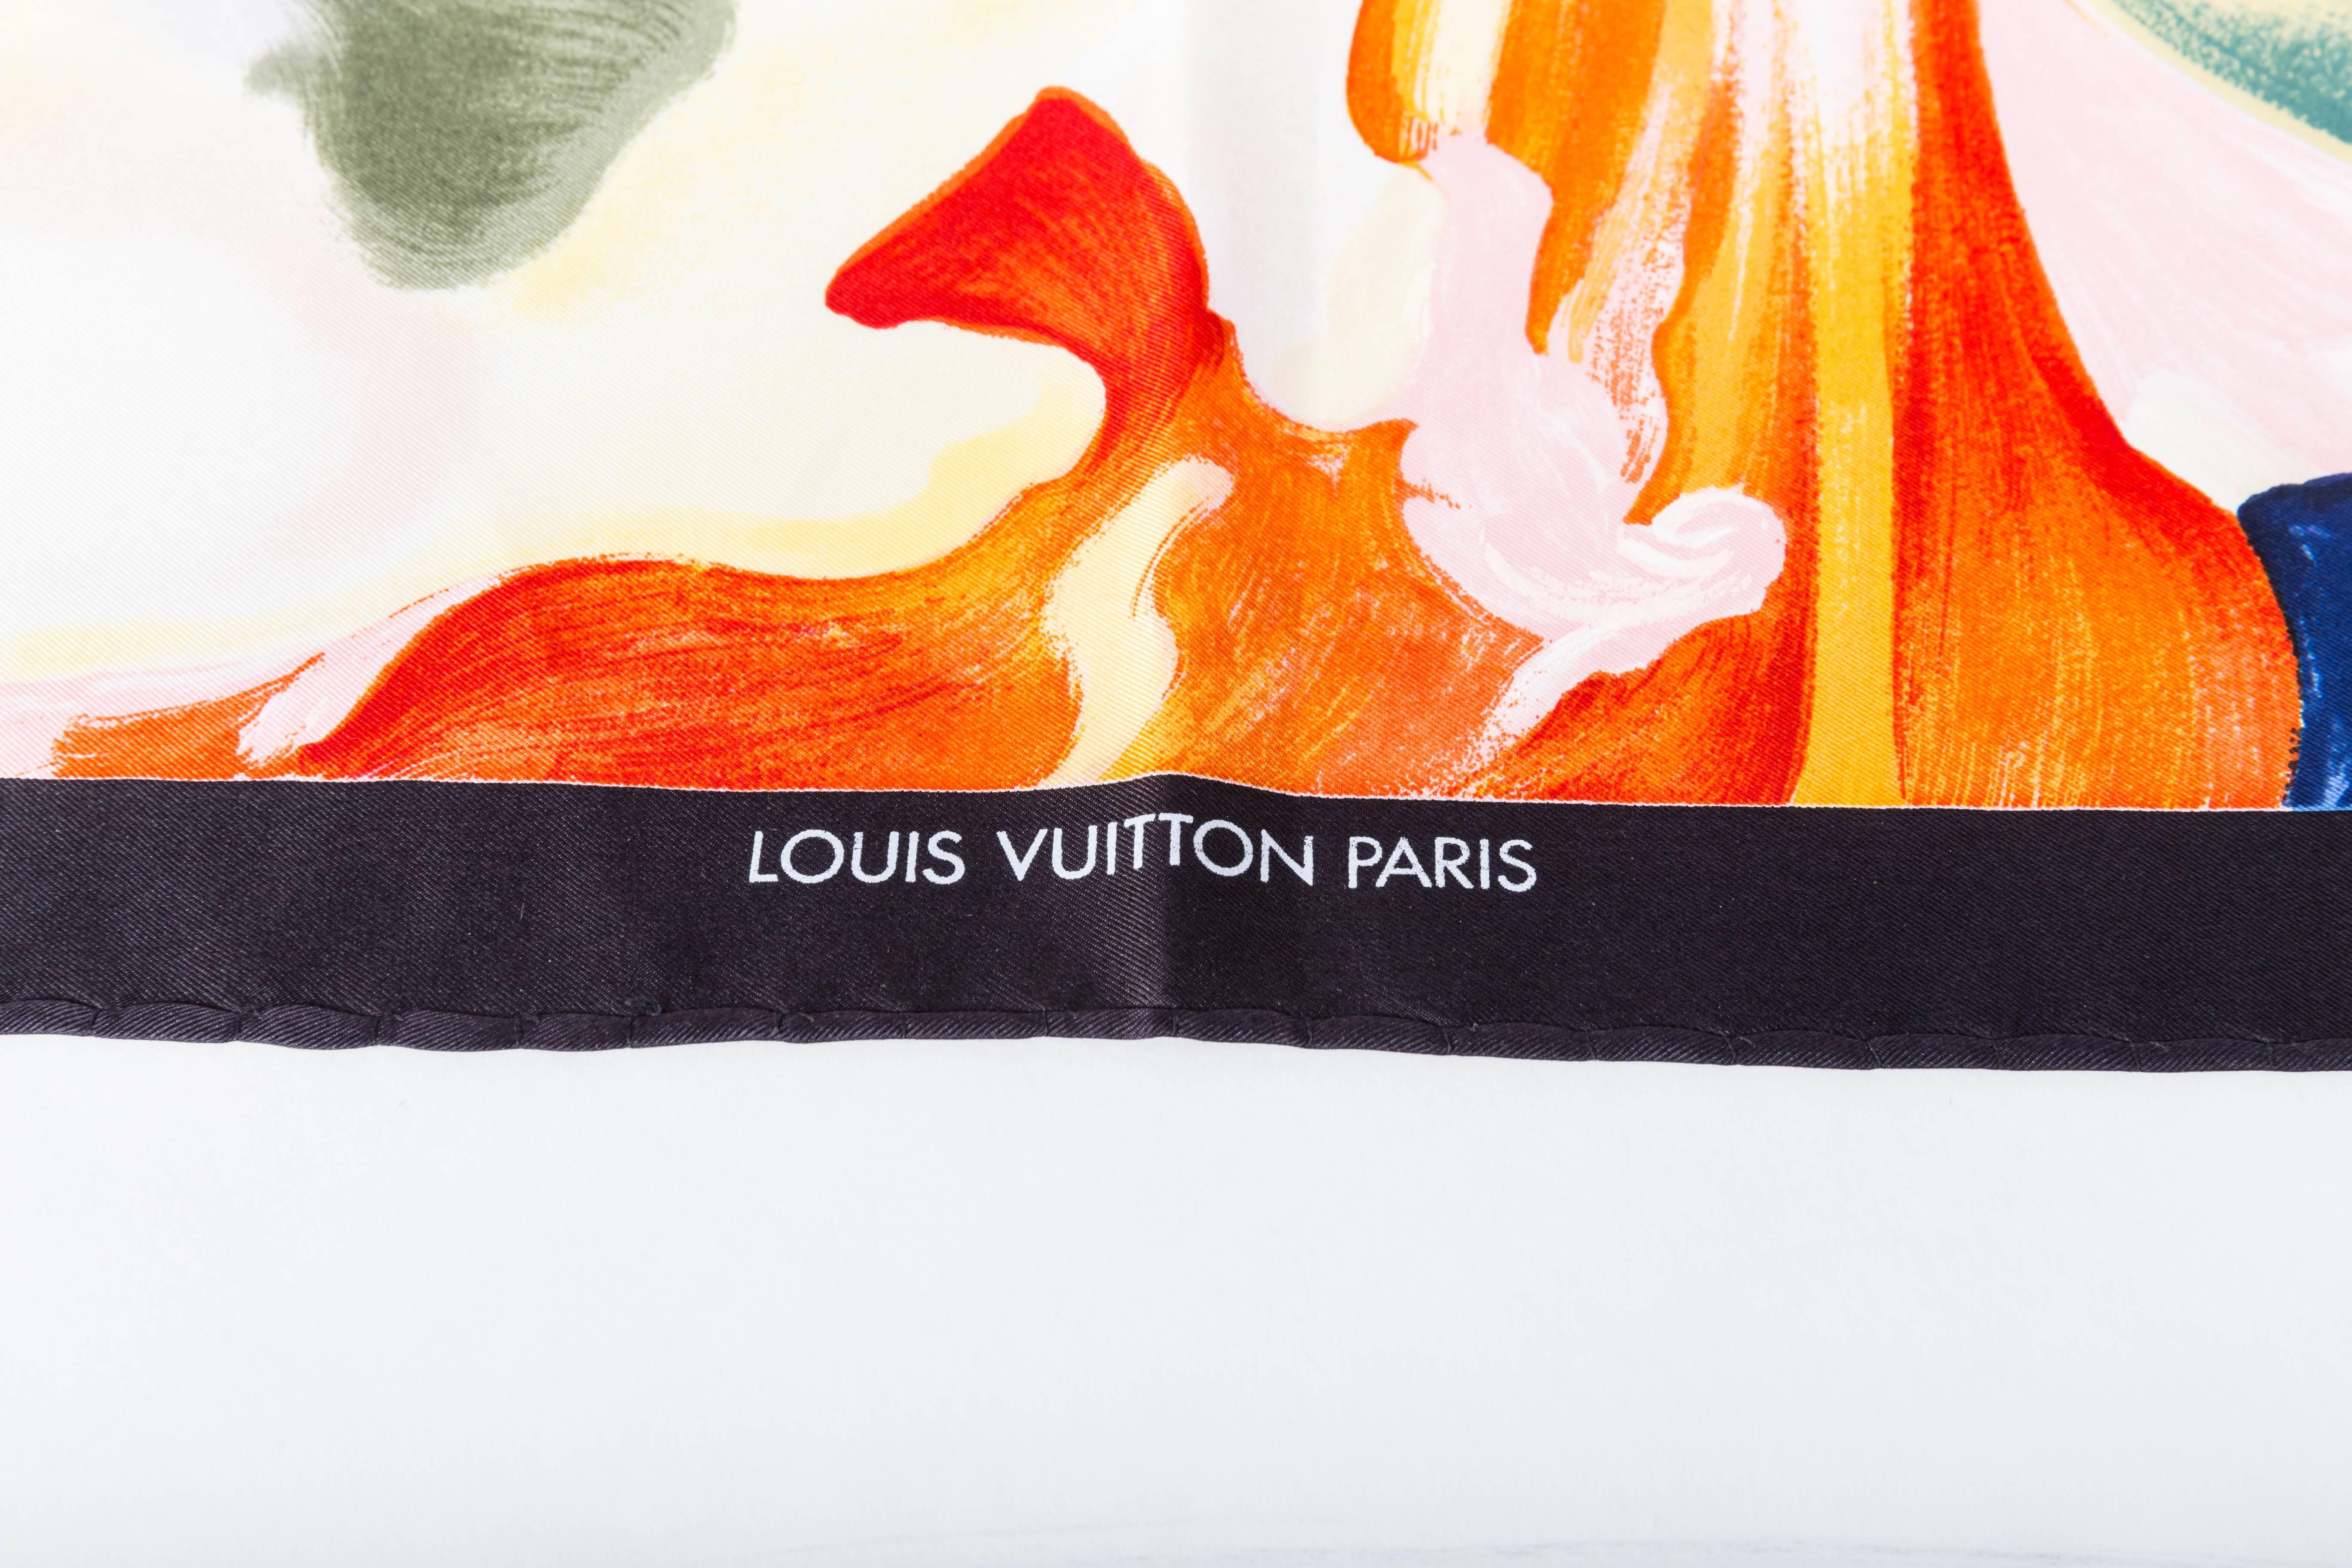 Louis Vuitton Silk Scarf by James Rosenquist For Sale 3